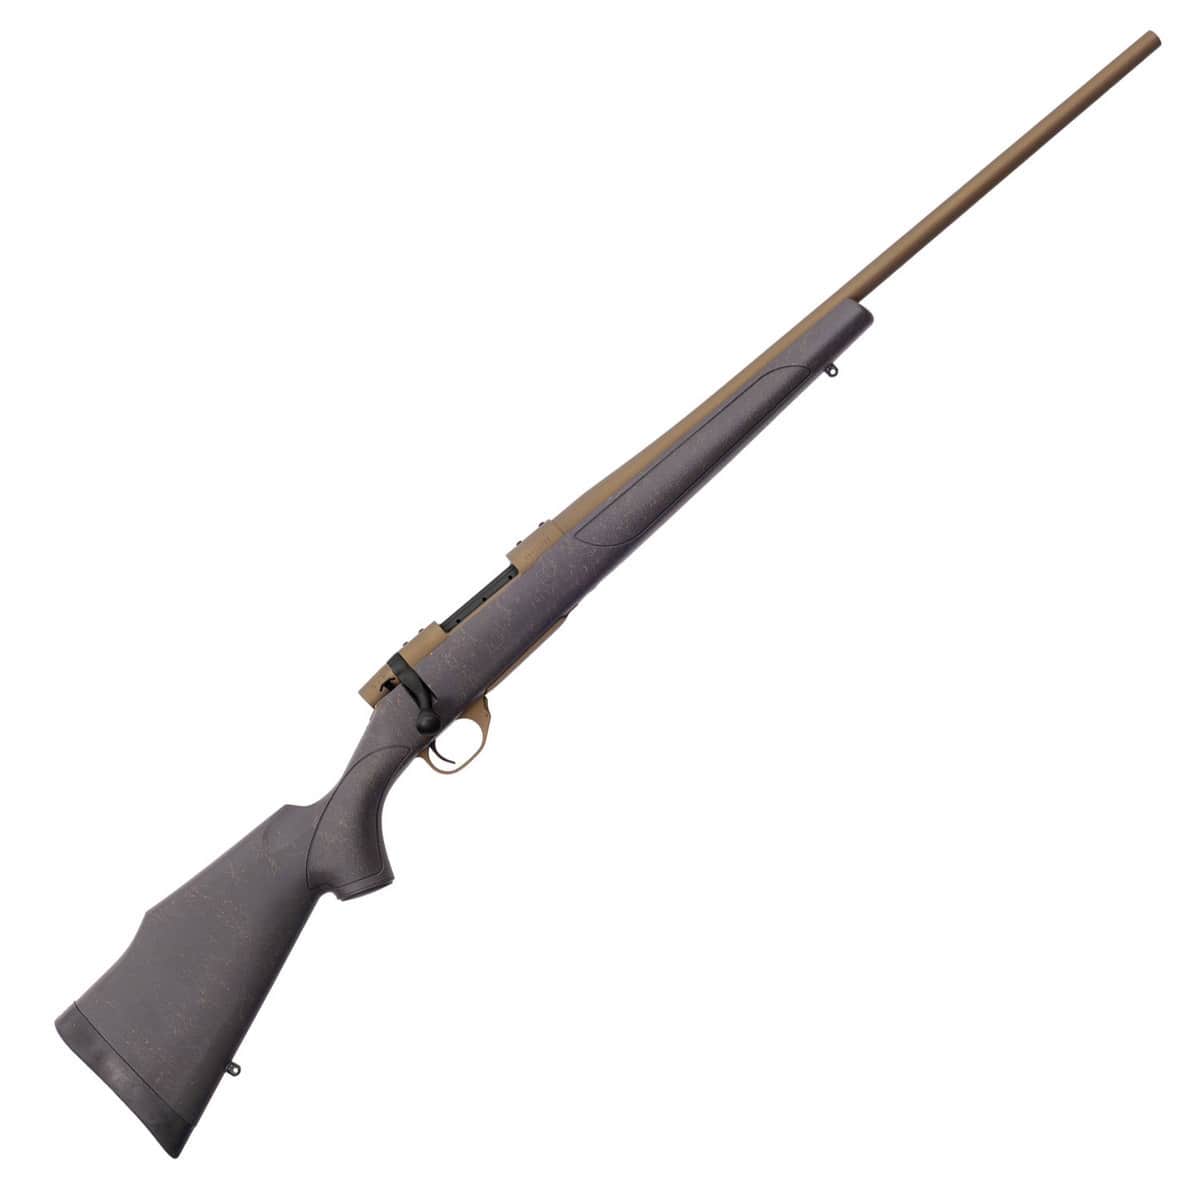 The Gun: Weatherby Vanguard in 6.5 CM/300 Wby